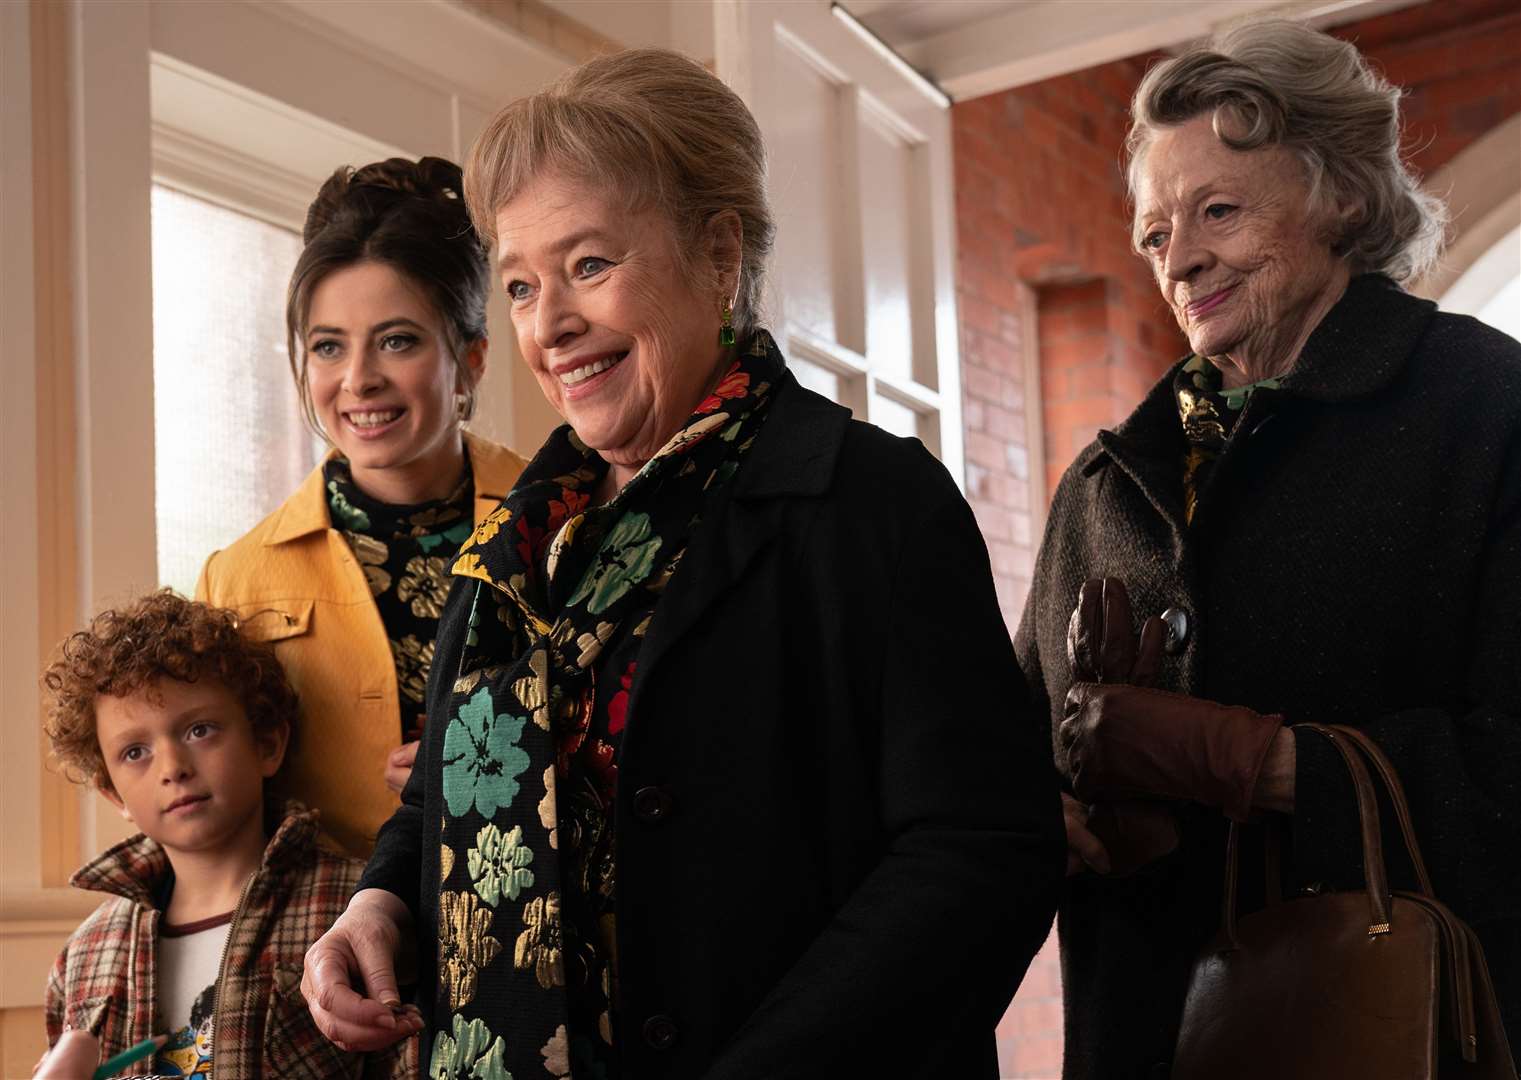 The Miracle Club with Eric D Smith as Daniel Hennessy, Agnes O'Casey as Dolly Hennessy, Kathy Bates as Eileen Dunne and Maggie Smith as Lily Fox. Picture: Lionsgate/Jonathan Hession © 2023 PA Media